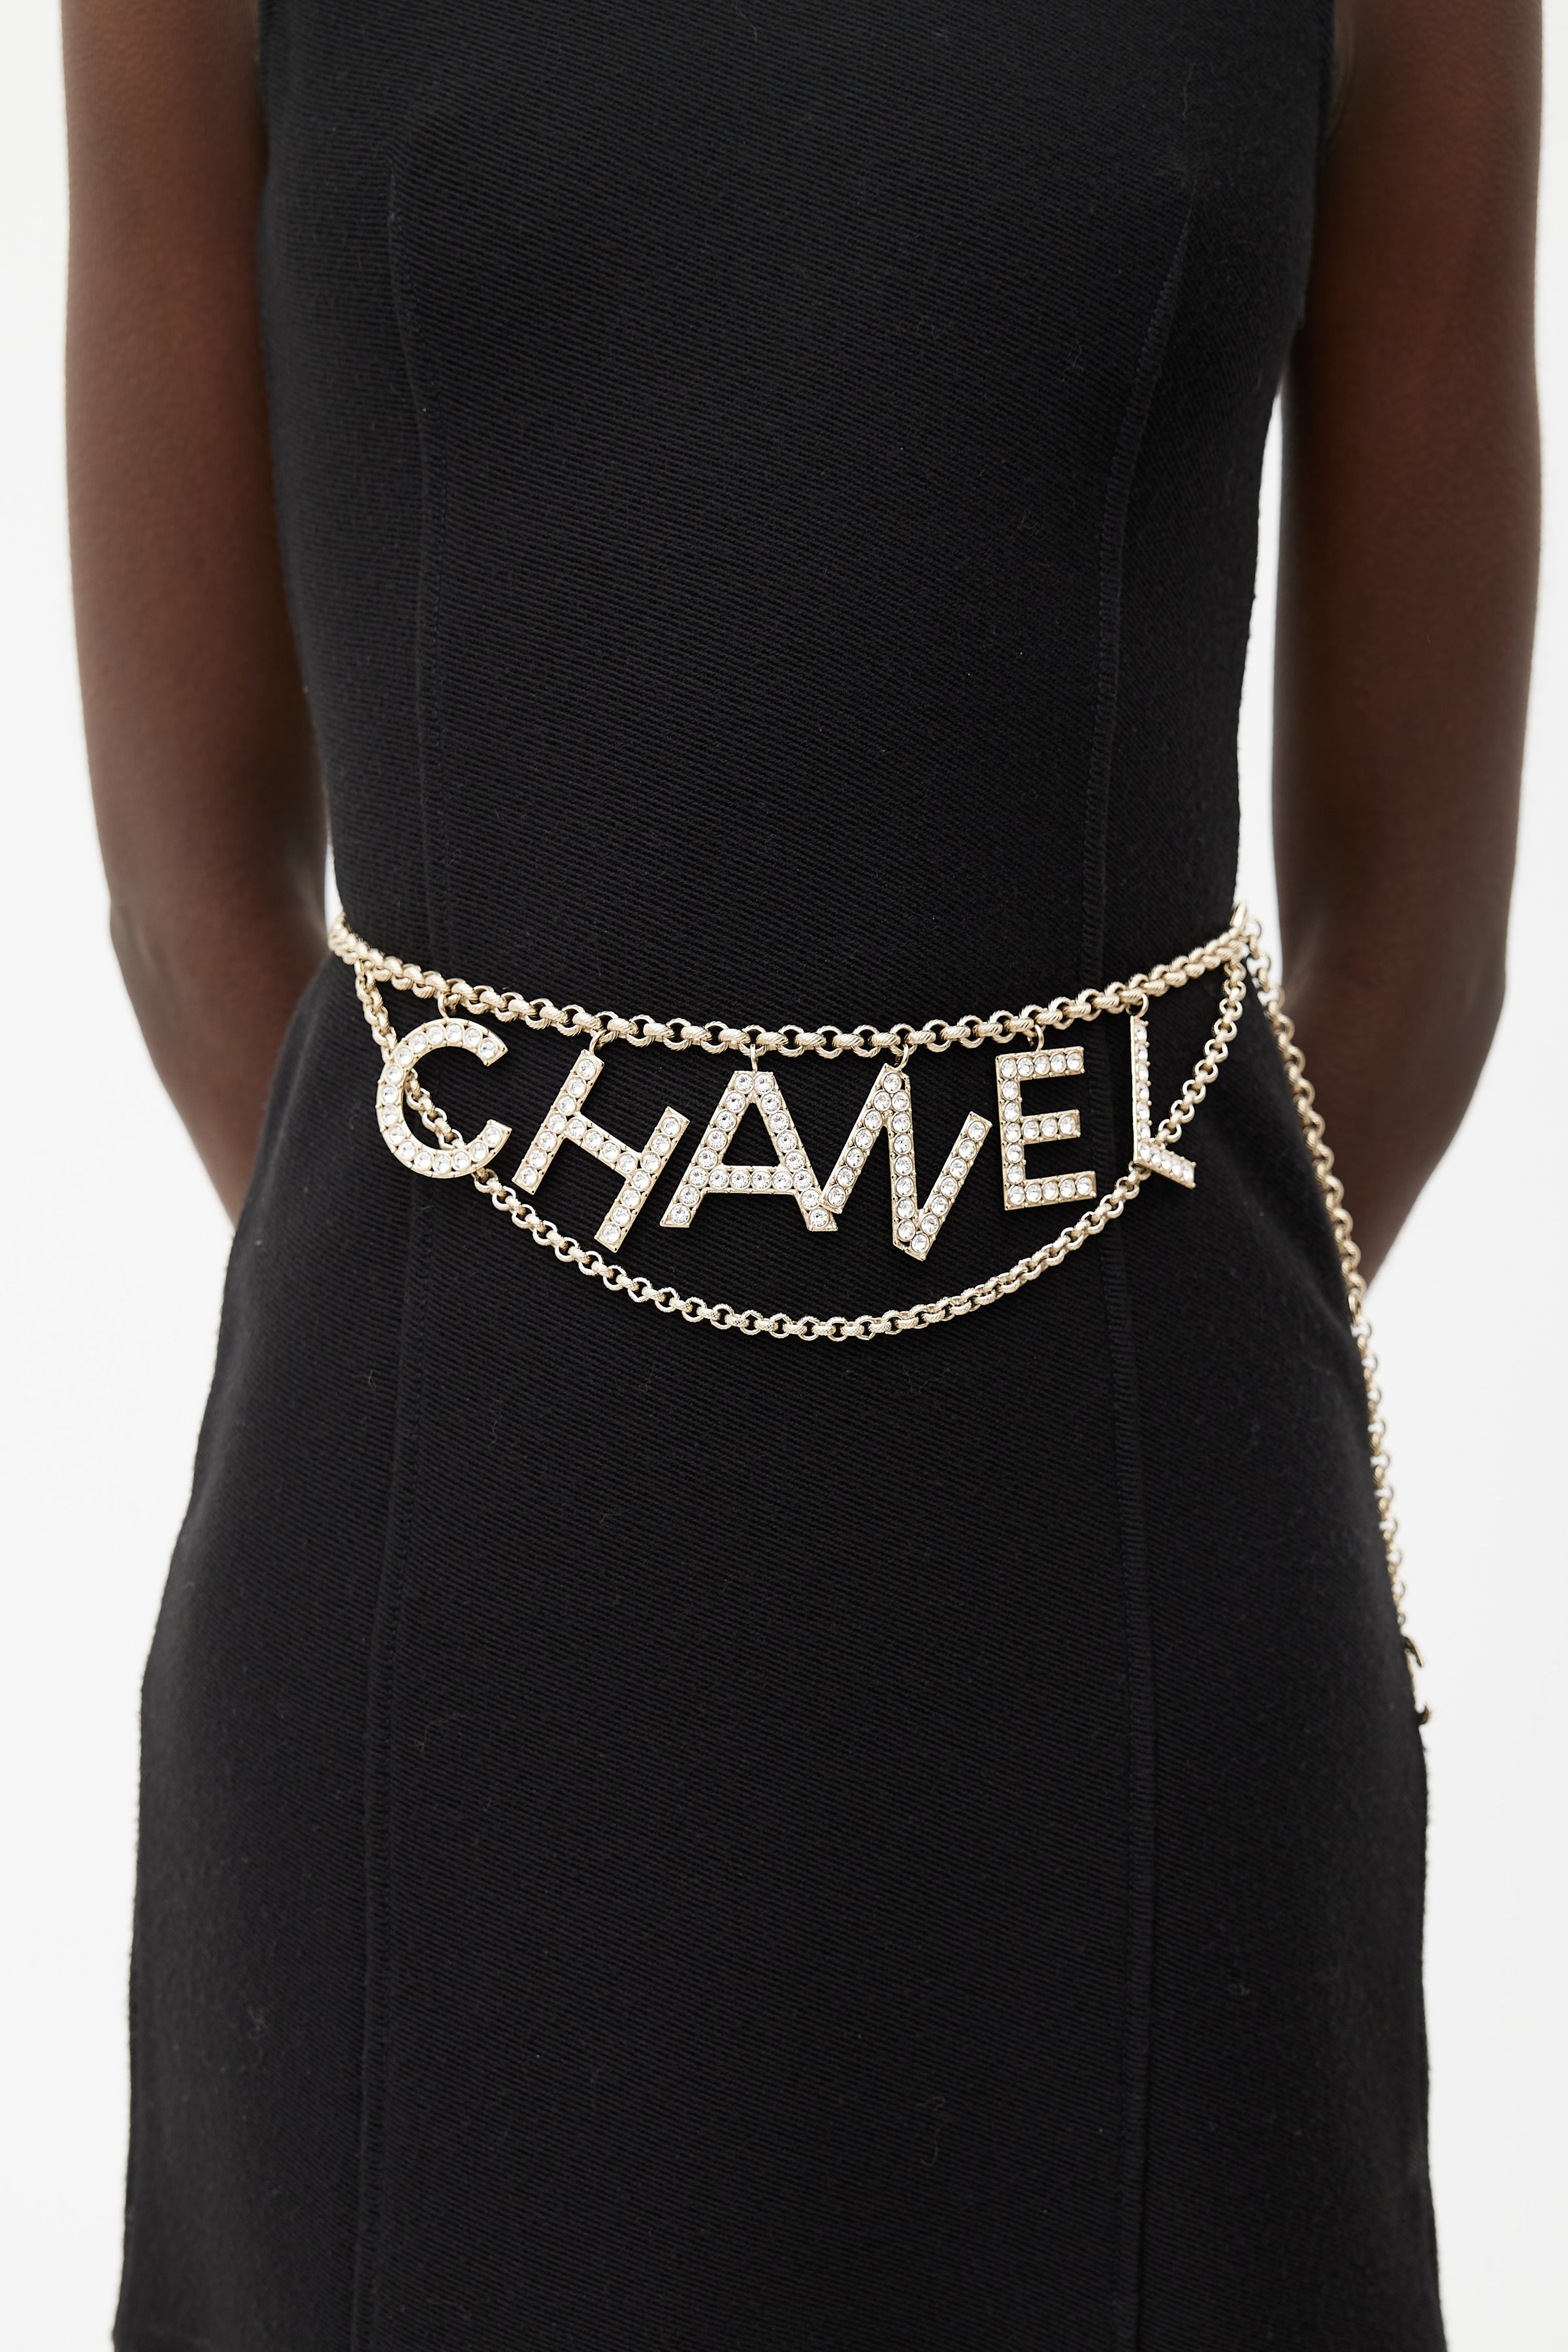 CHANEL, Accessories, Chanel Gold Tone Large Cc Belt Buckle With Black  Leather Chanel Belt